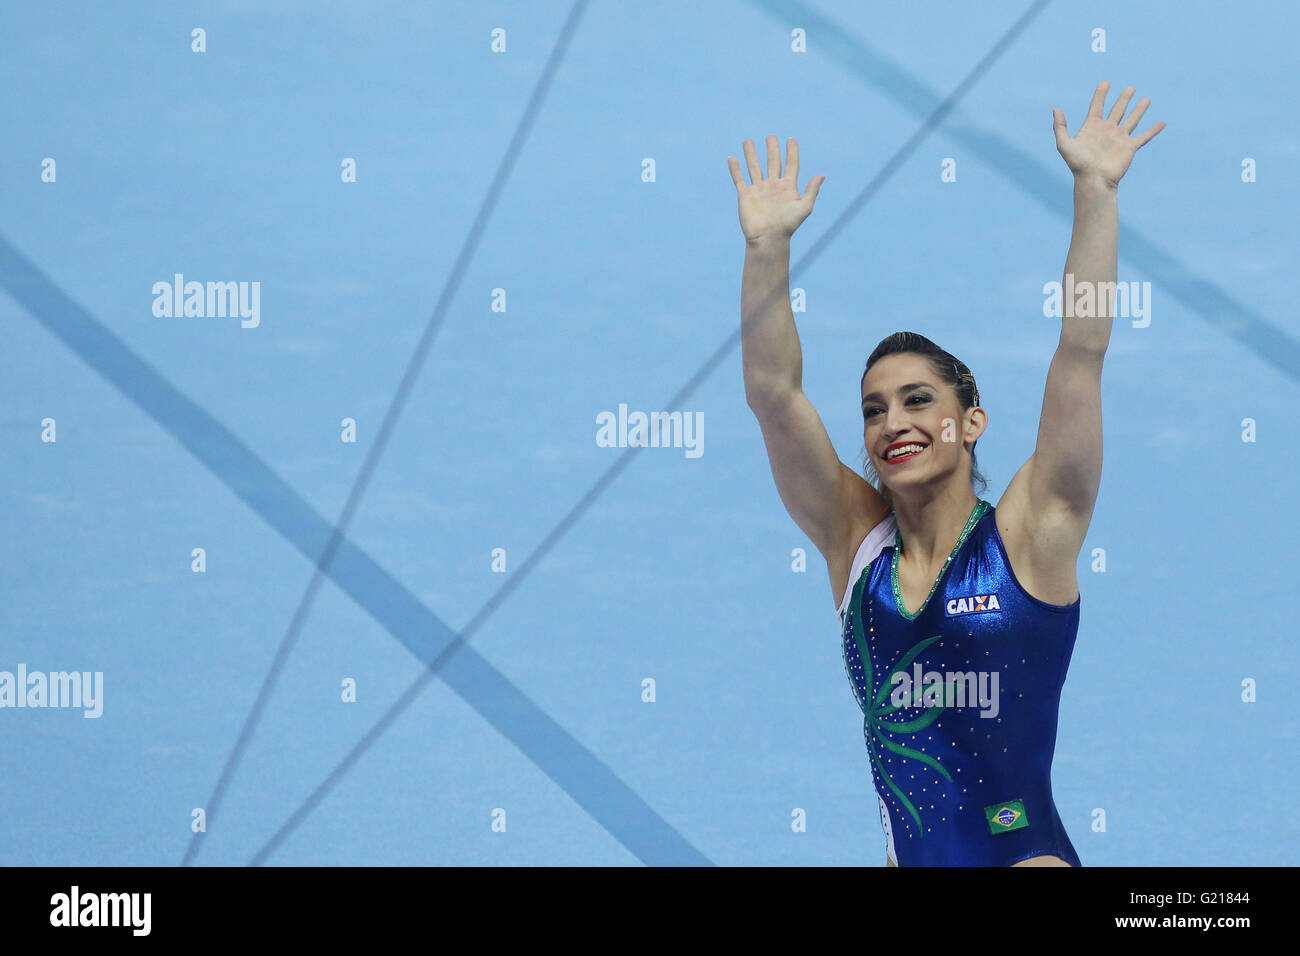 Sao Paulo, Brazil. 21st May, 2016. Brazil's Daniele Hypolito celebrates her first place at the end of the women's vault competition during the 2016 Artistic Gymnastics World Challenge Cup, in Sao Paulo, Brazil, on May 21, 2016. The Brazilian stage of the Artistic Gymnastics World Challenge Cup IS held in Sao Paulo from May 2O to 22, with the participation of gymnasts of eight countries, namely Brazil, Argentina, Chile, Colombia, Venezuela, Germany, Finland and Japan. © Rahel Patrasso/Xinhua/Alamy Live News Stock Photo